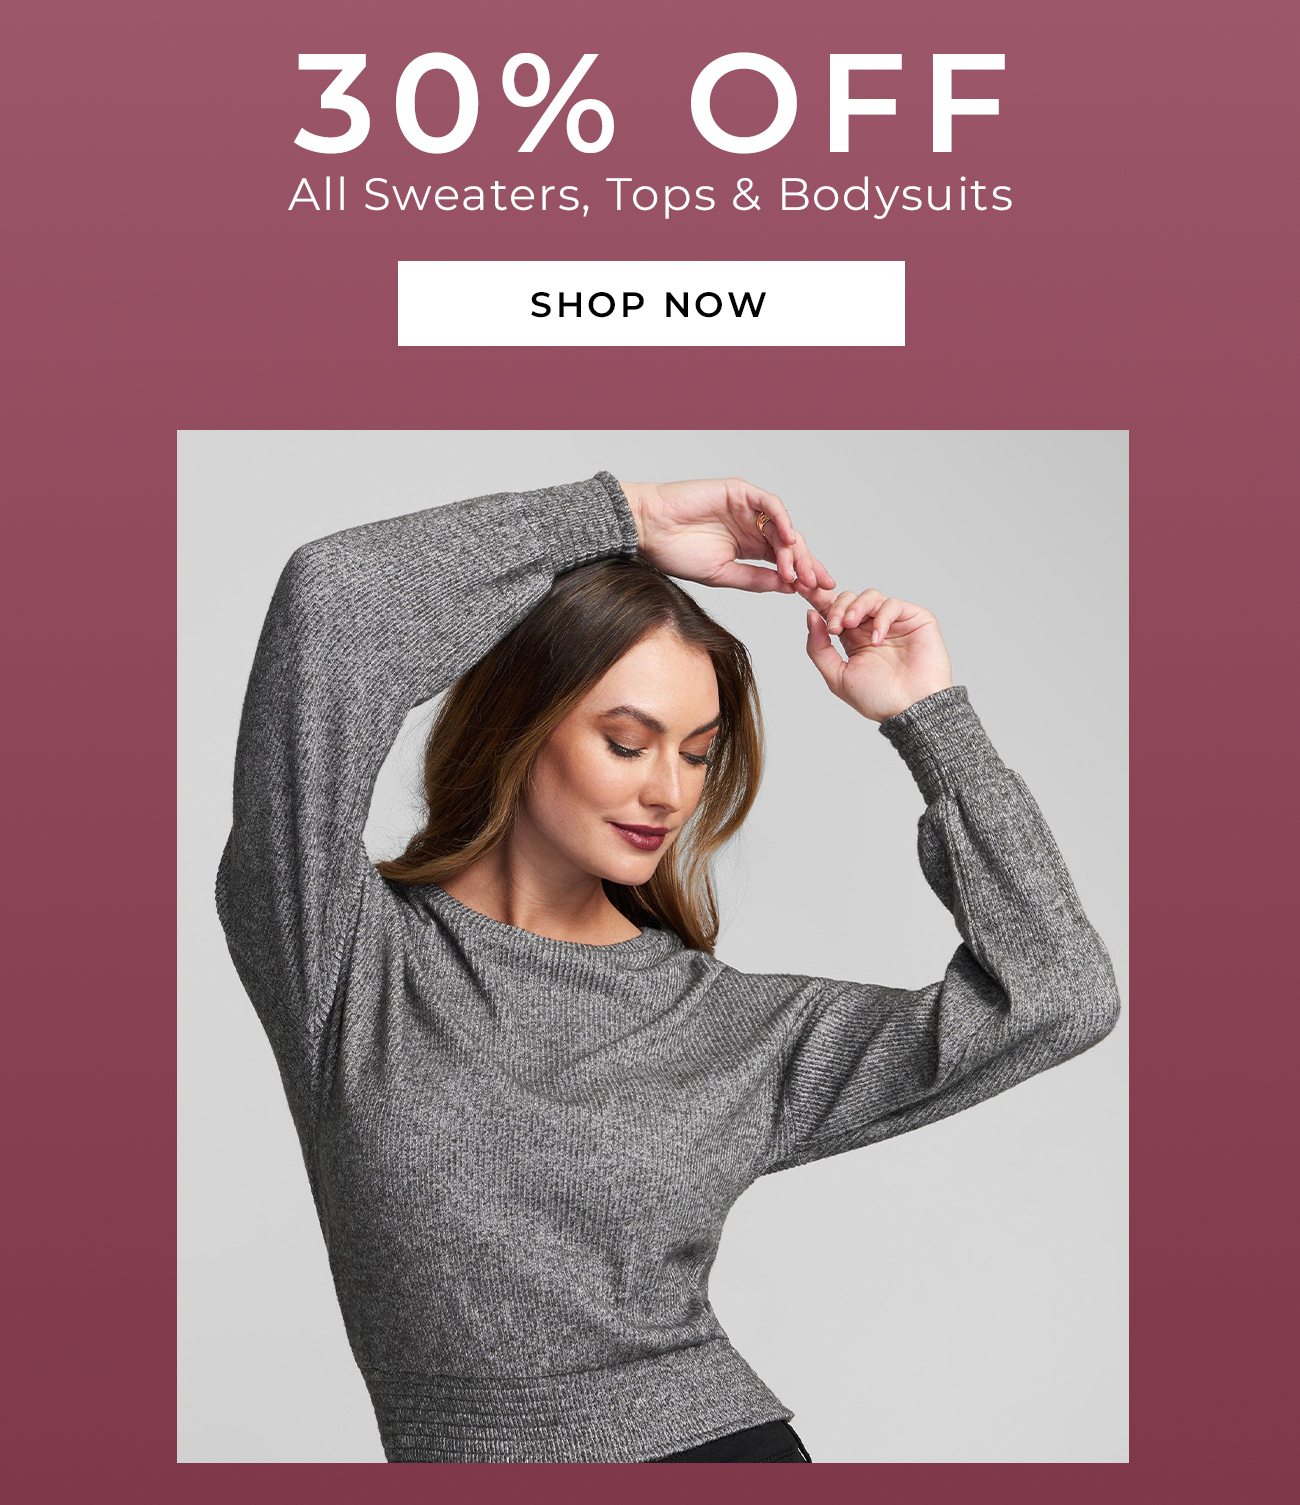 30% Off All Sweaters, Tops & Bodysuits